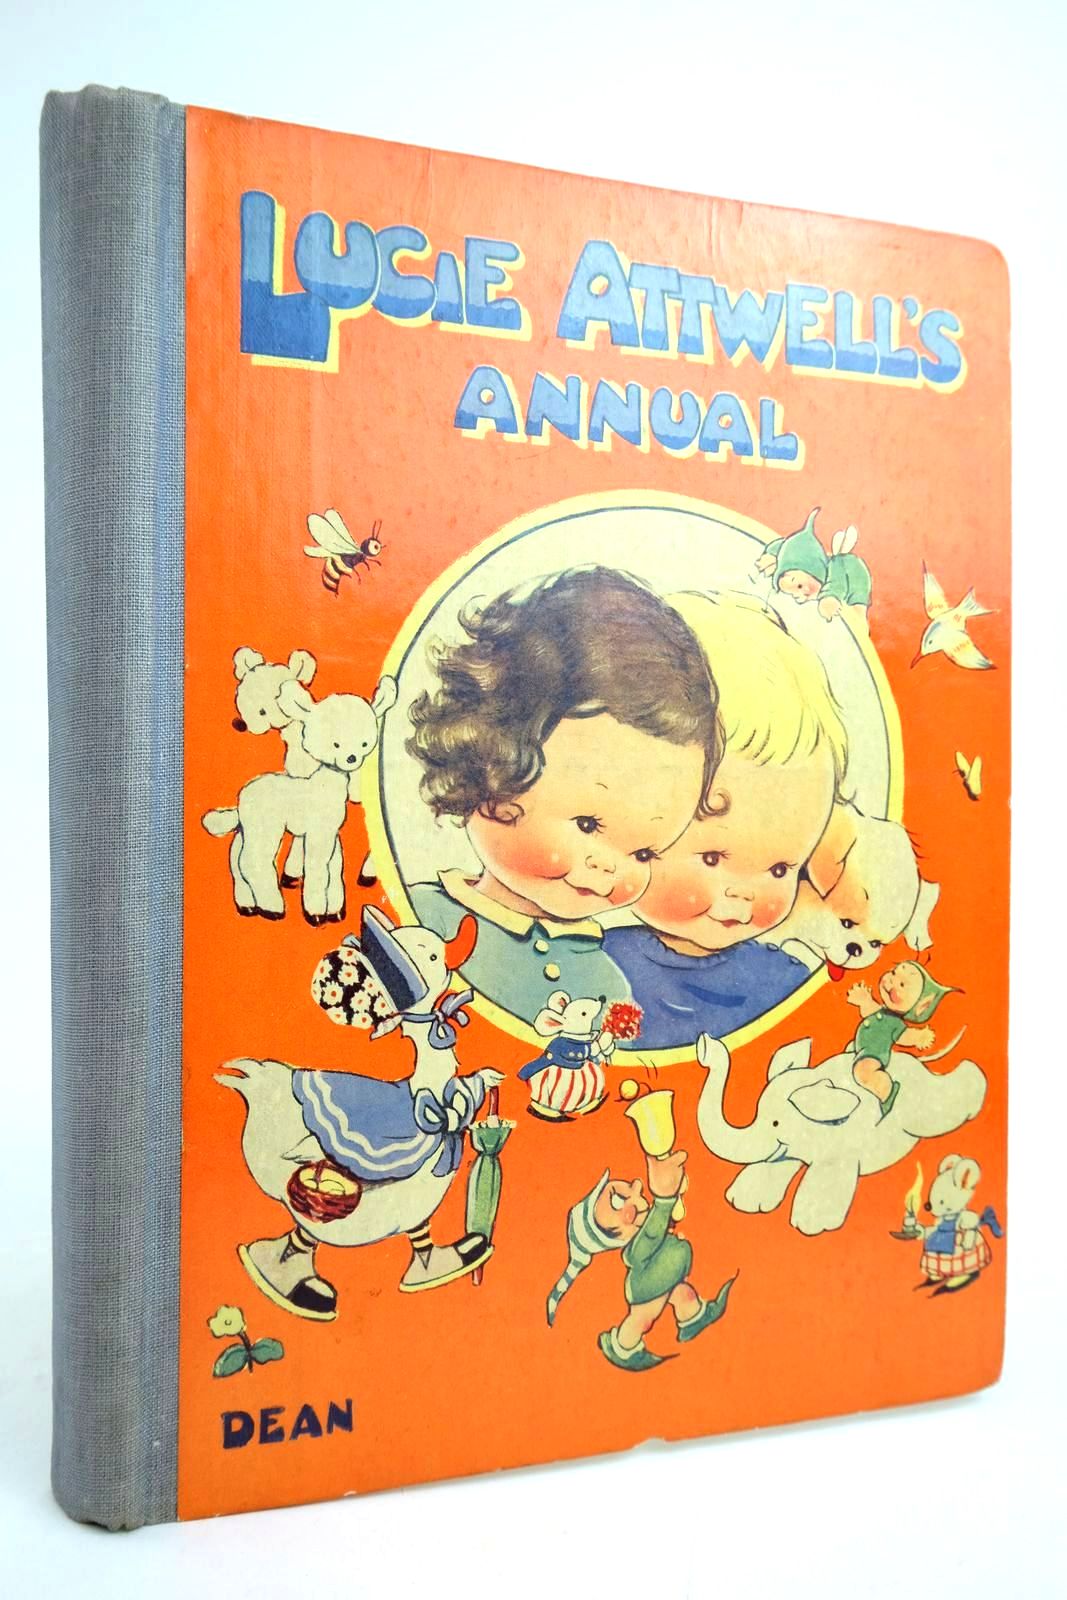 Photo of LUCIE ATTWELL'S ANNUAL 1946 written by Attwell, Mabel Lucie illustrated by Attwell, Mabel Lucie published by Dean &amp; Son Ltd. (STOCK CODE: 2135058)  for sale by Stella & Rose's Books